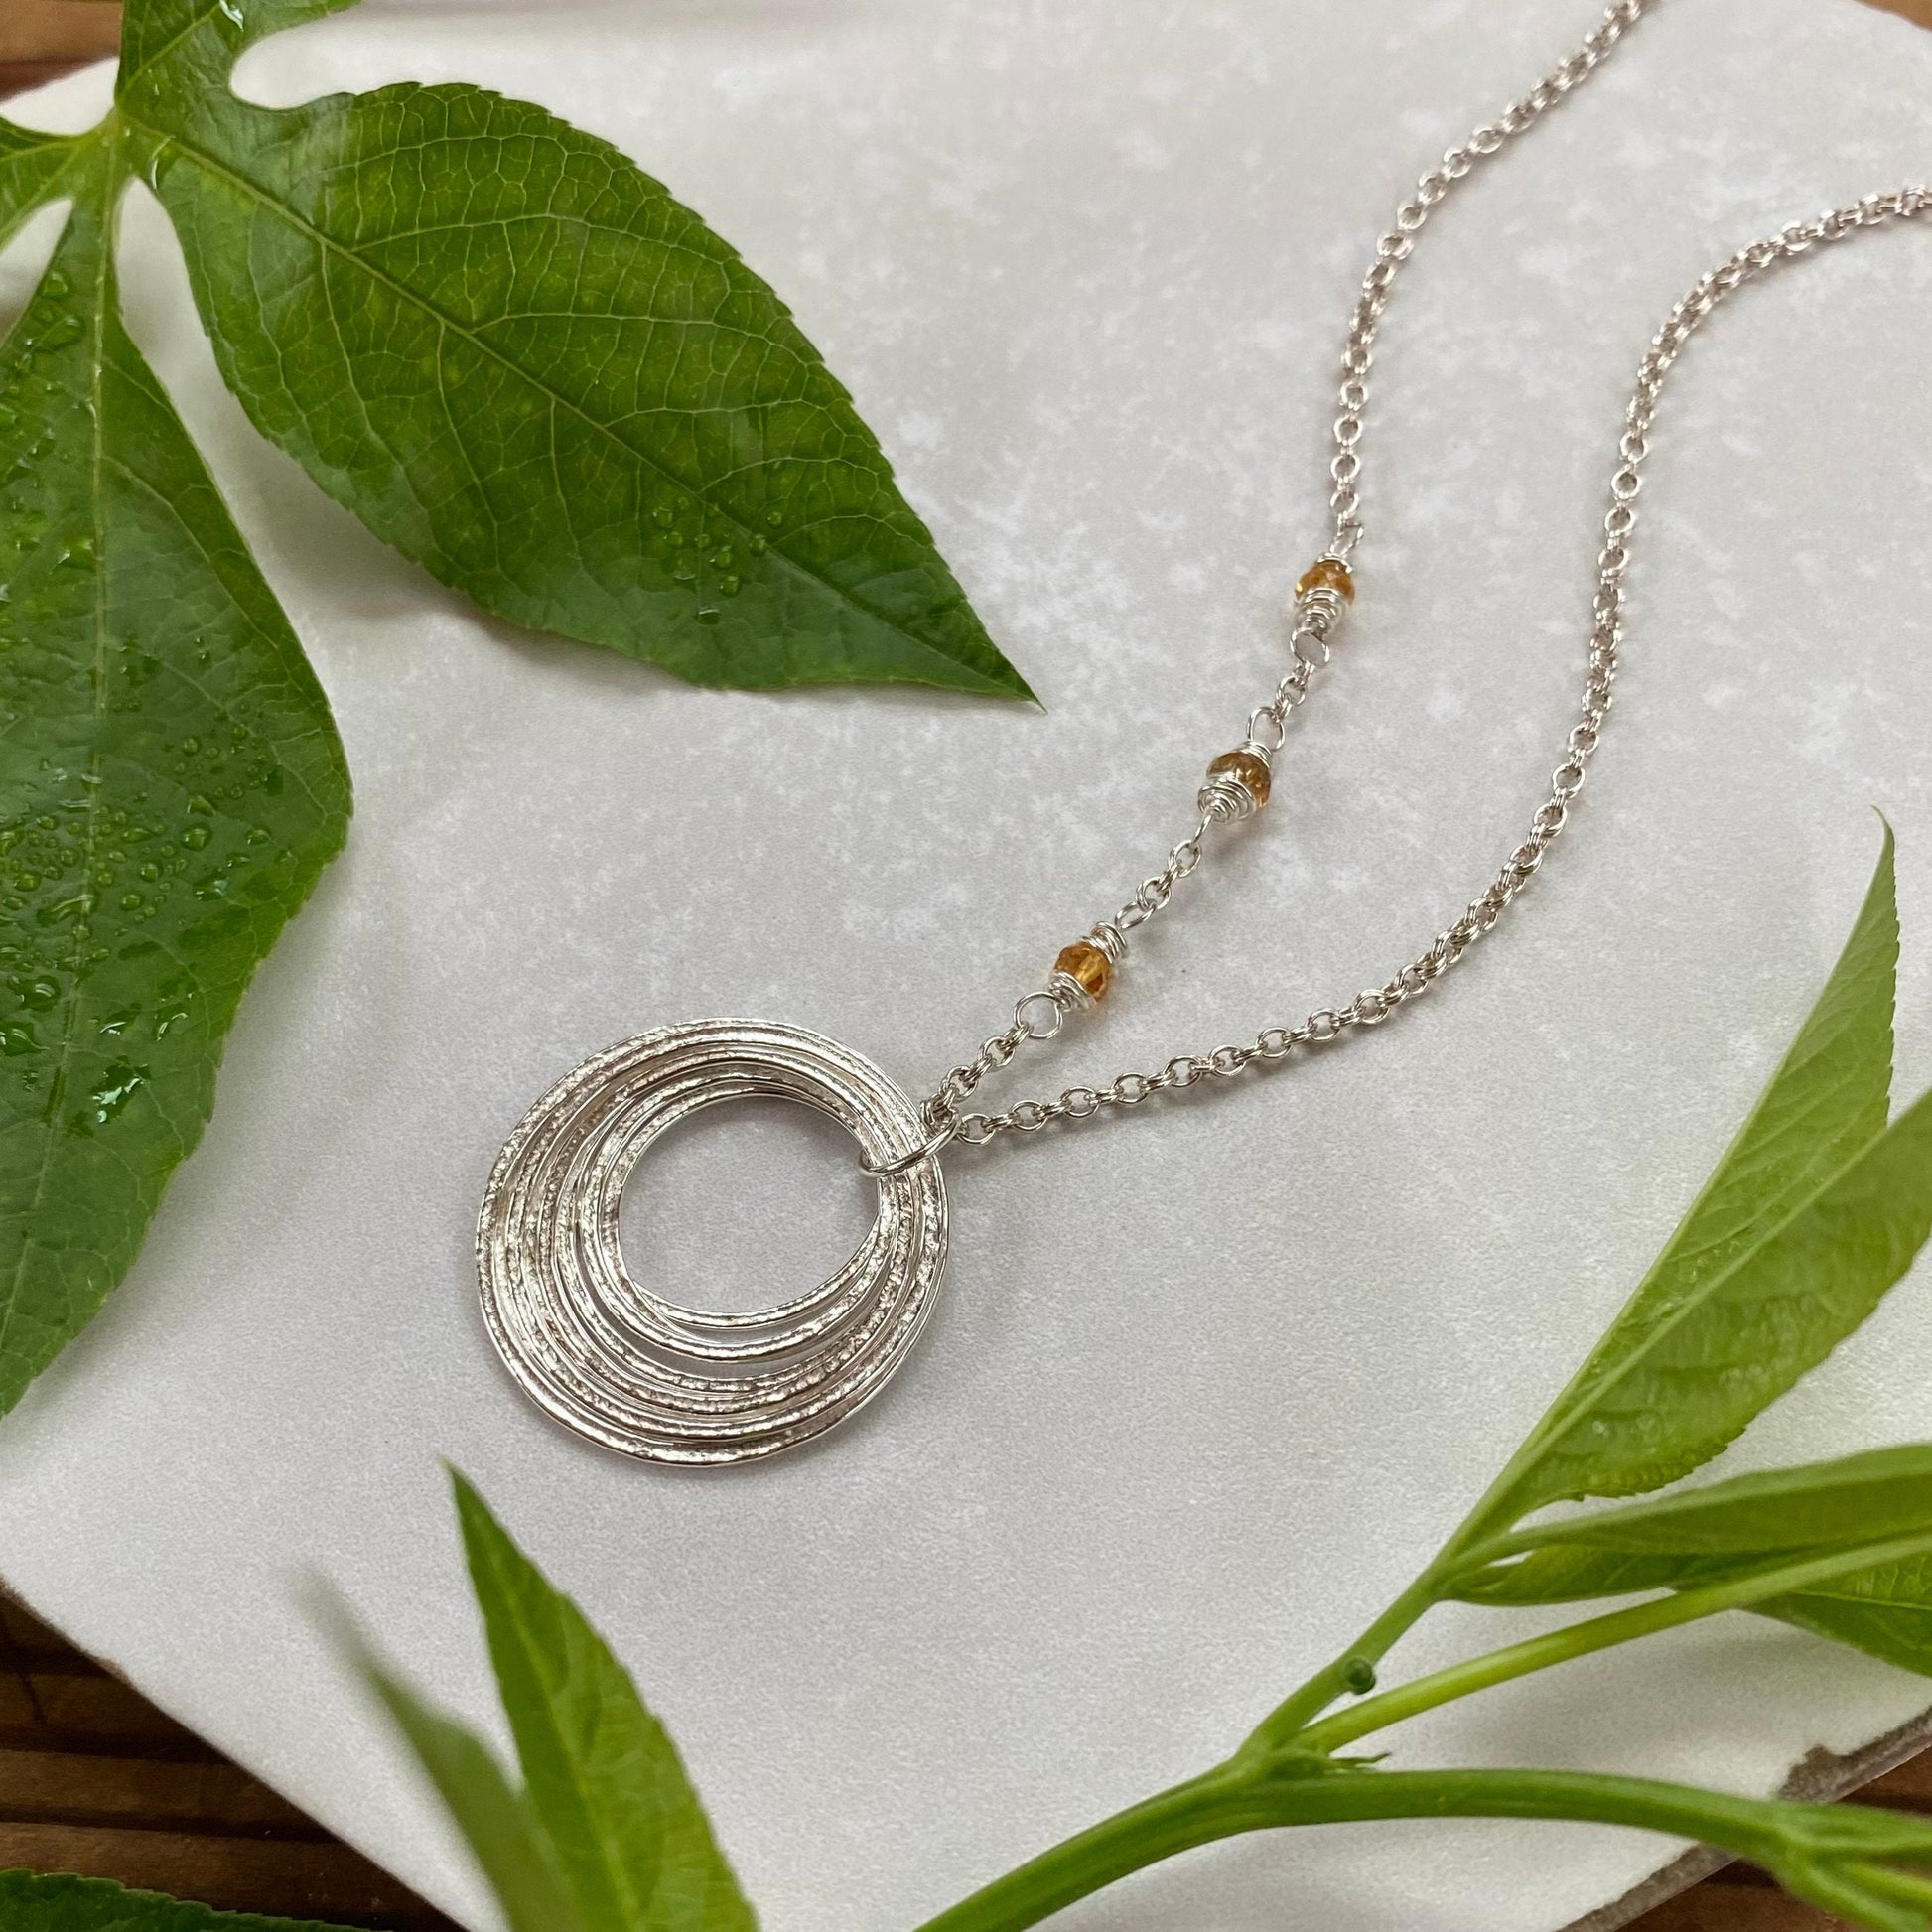 90th Birthday Minimalist Birthstone Necklace, Handcrafted Sterling Silver Nine Circle Pendant, 9 Rings for 9 Decades, 90th Birthday Gift